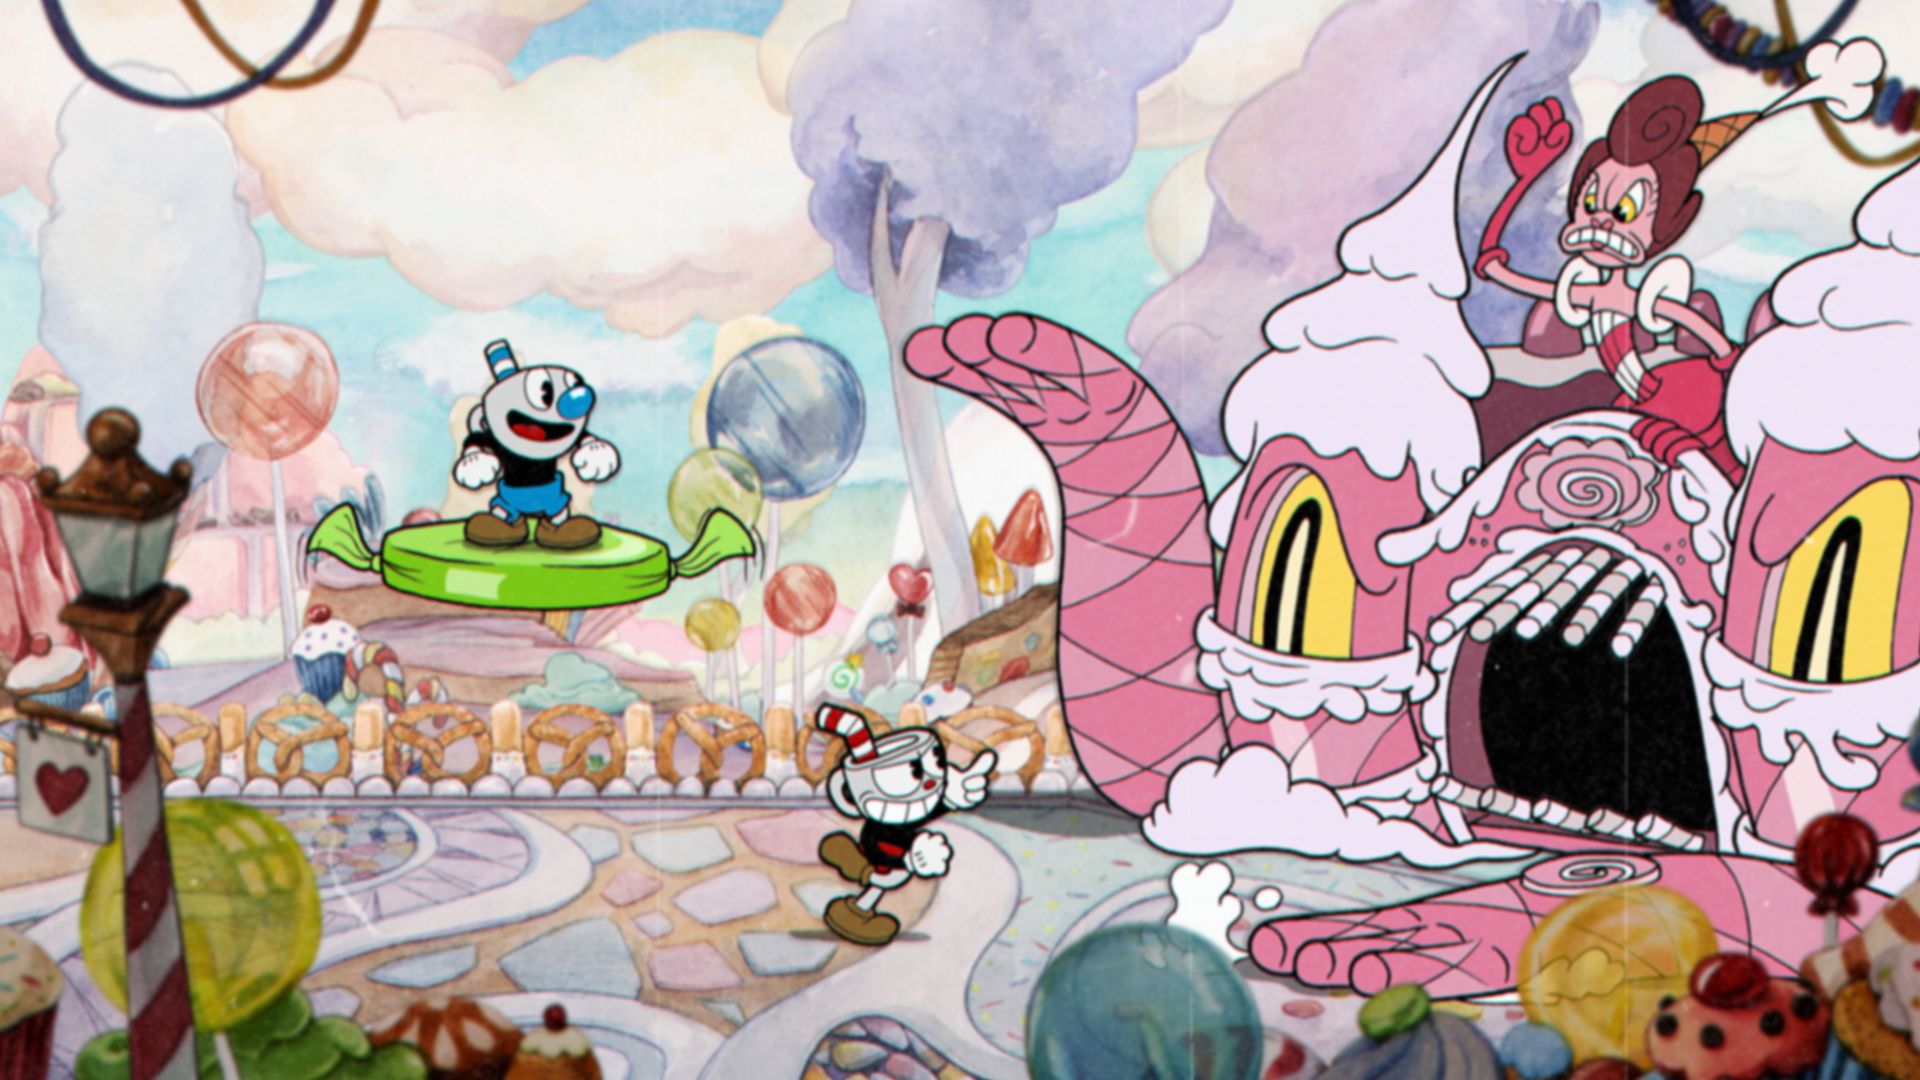 The Cuphead Show! Season 2 Review: Another Glorious Round In Inkwell Isle -  KeenGamer